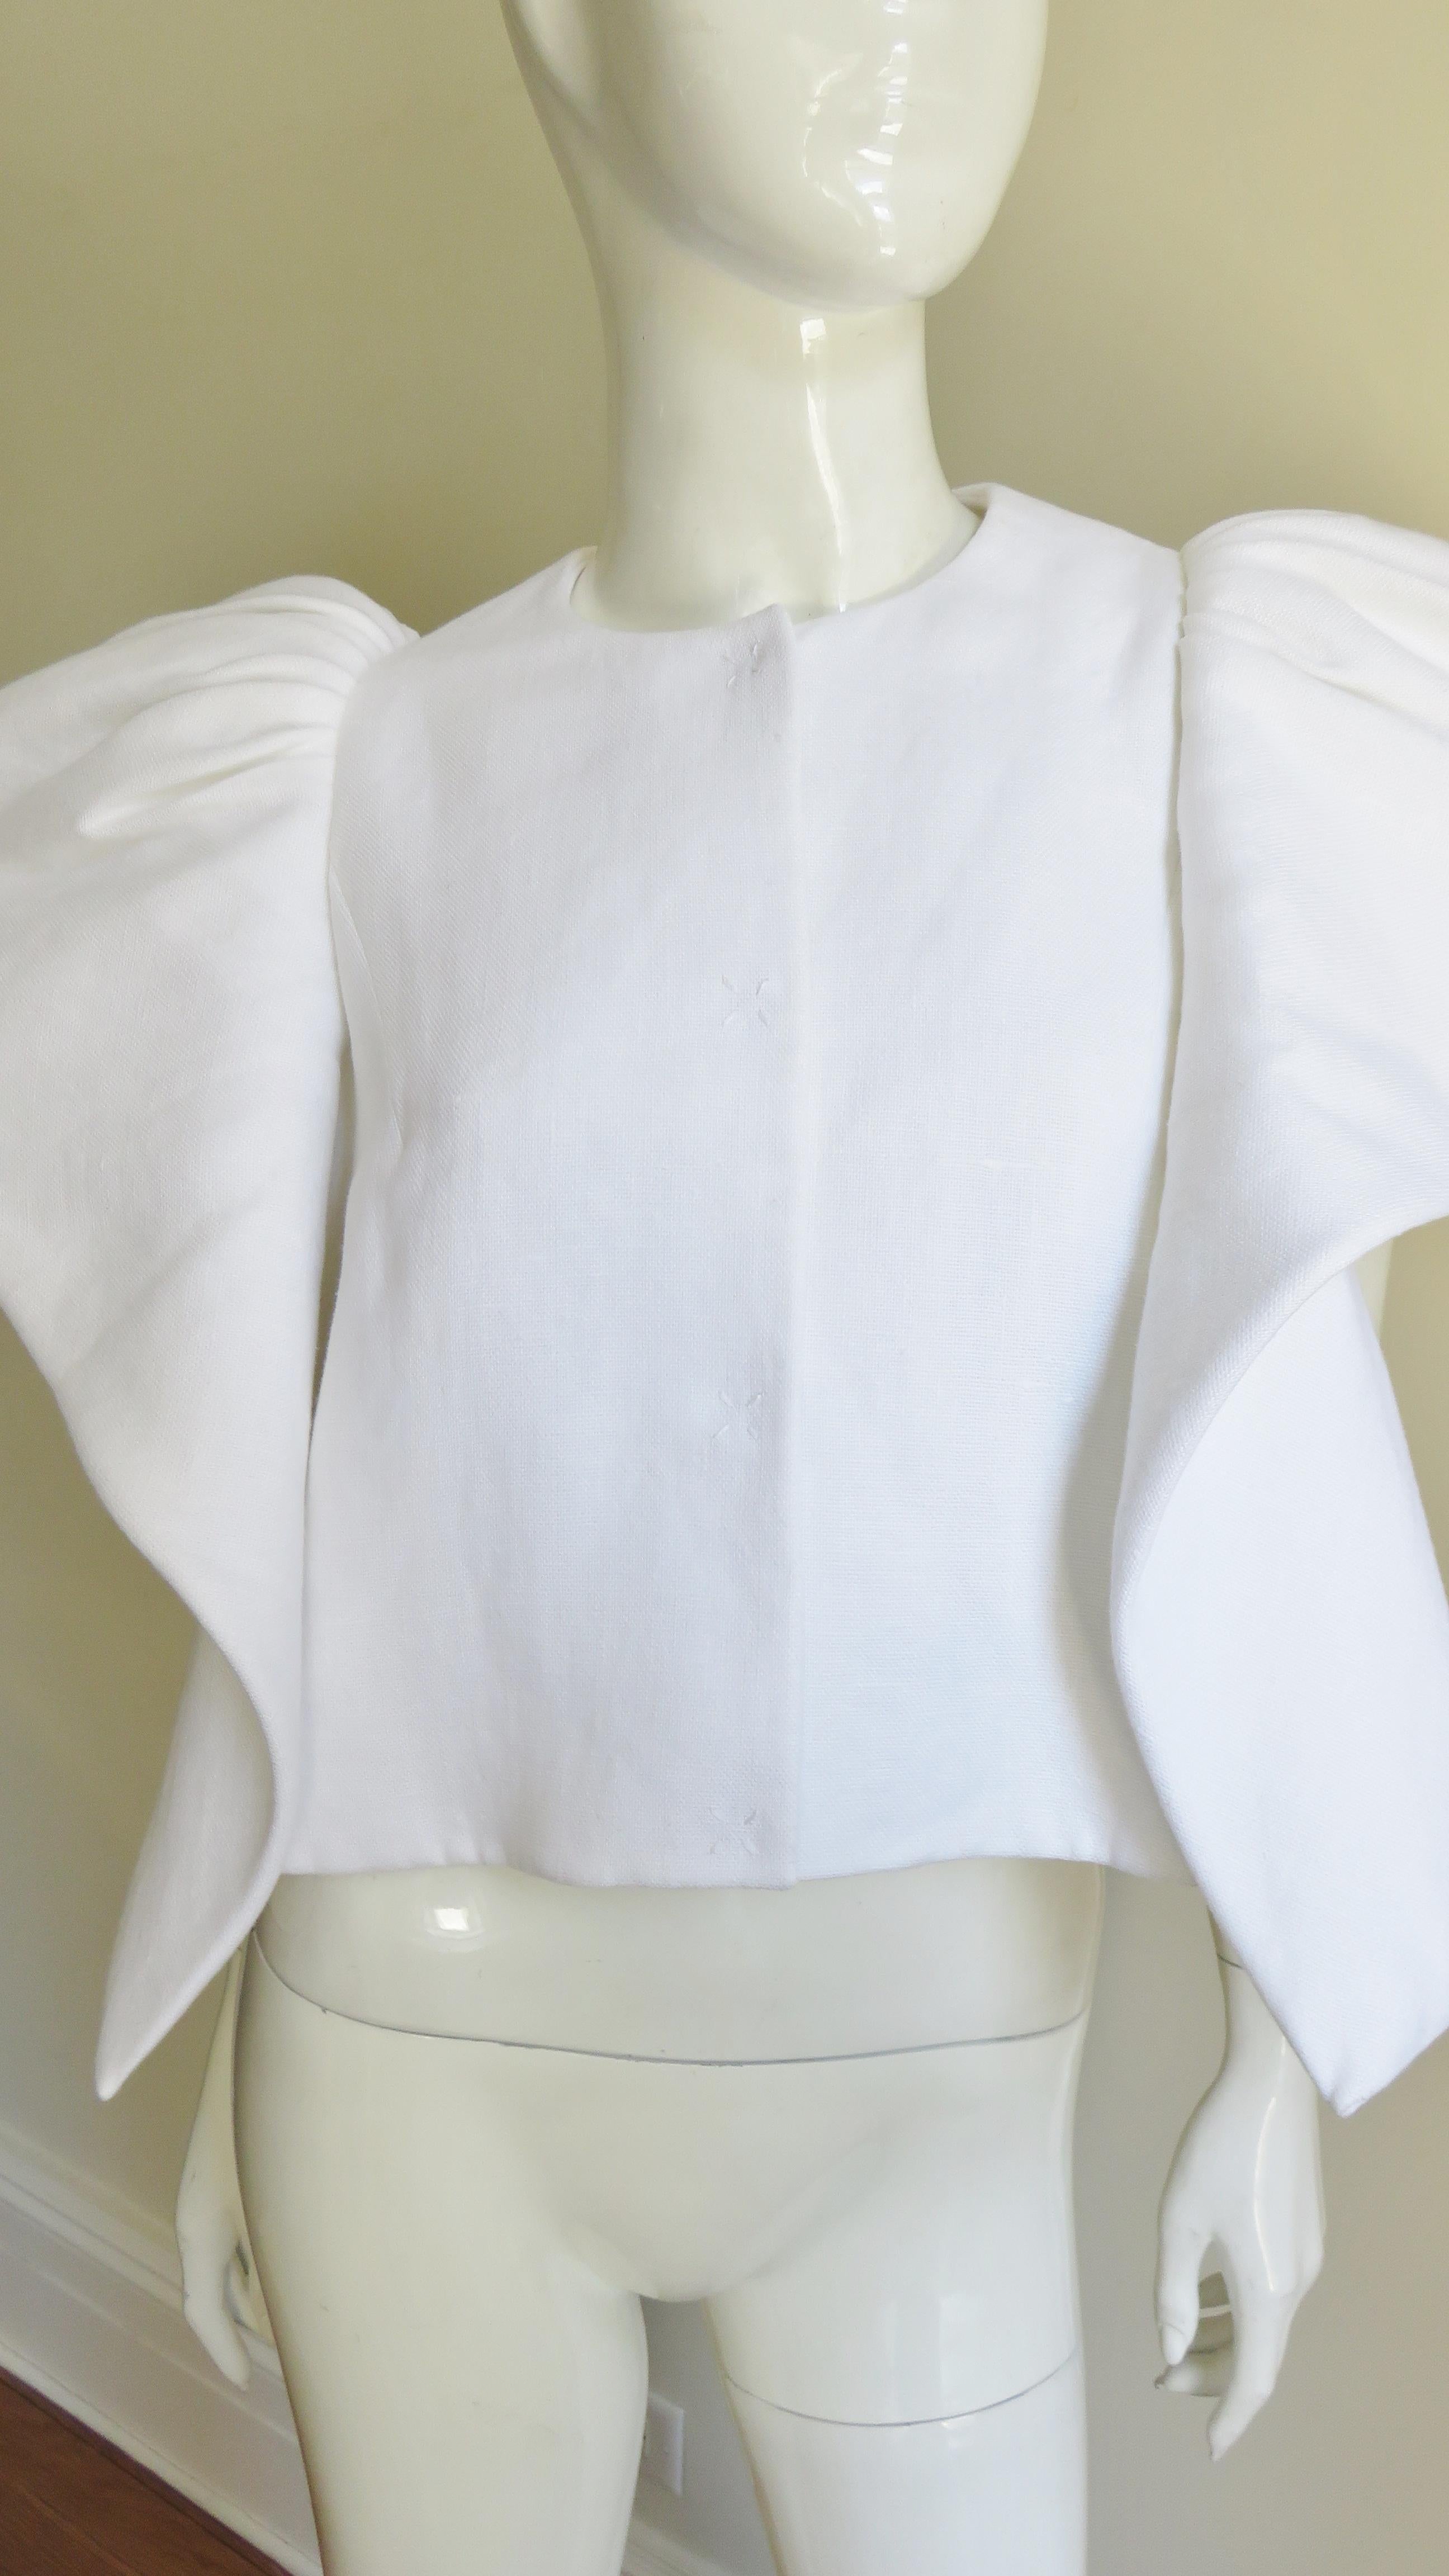 Delpozo Sculptural Linen Jacket In Excellent Condition For Sale In Water Mill, NY